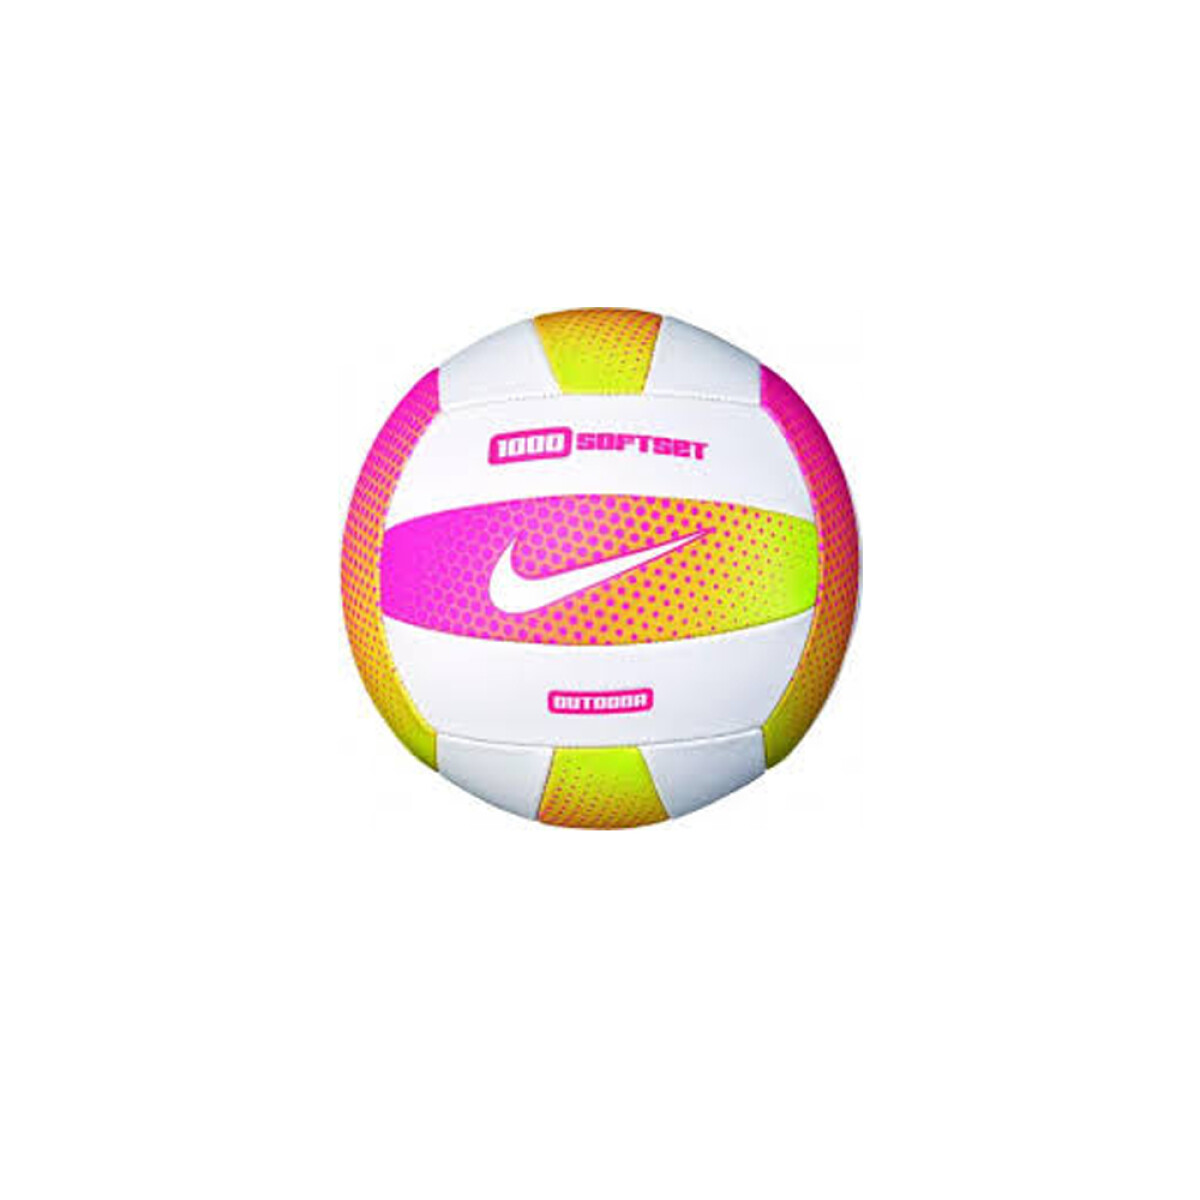 NIKE 1000 SOFTSET OUTDOOR VOLLEYBALL - 698 